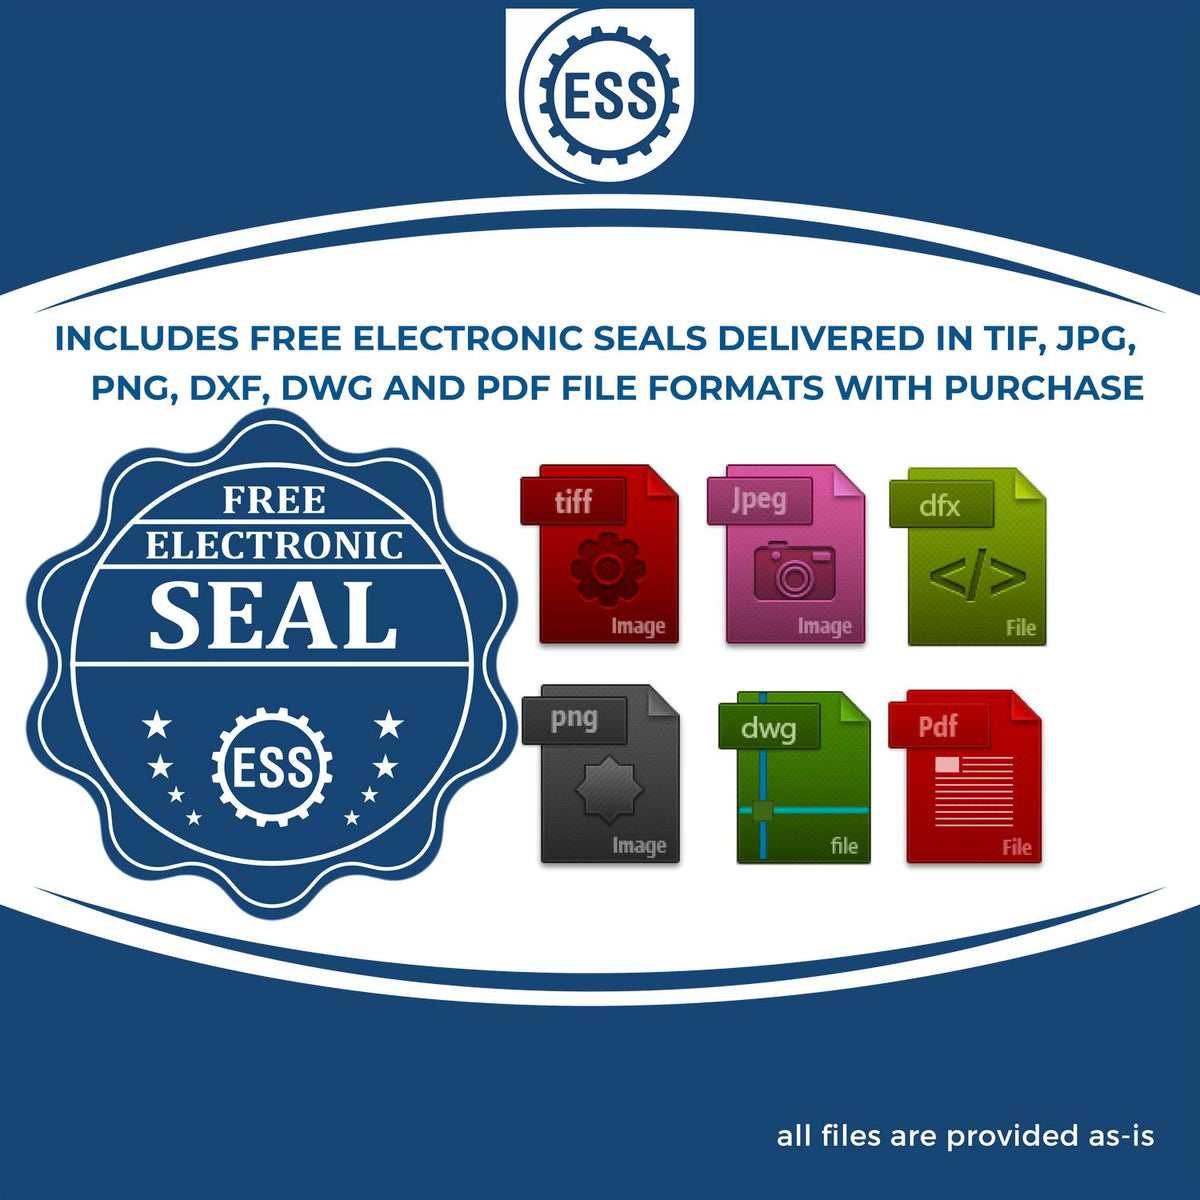 An infographic for the free electronic seal for the State of Oklahoma Extended Long Reach Engineer Seal illustrating the different file type icons such as DXF, DWG, TIF, JPG and PNG.